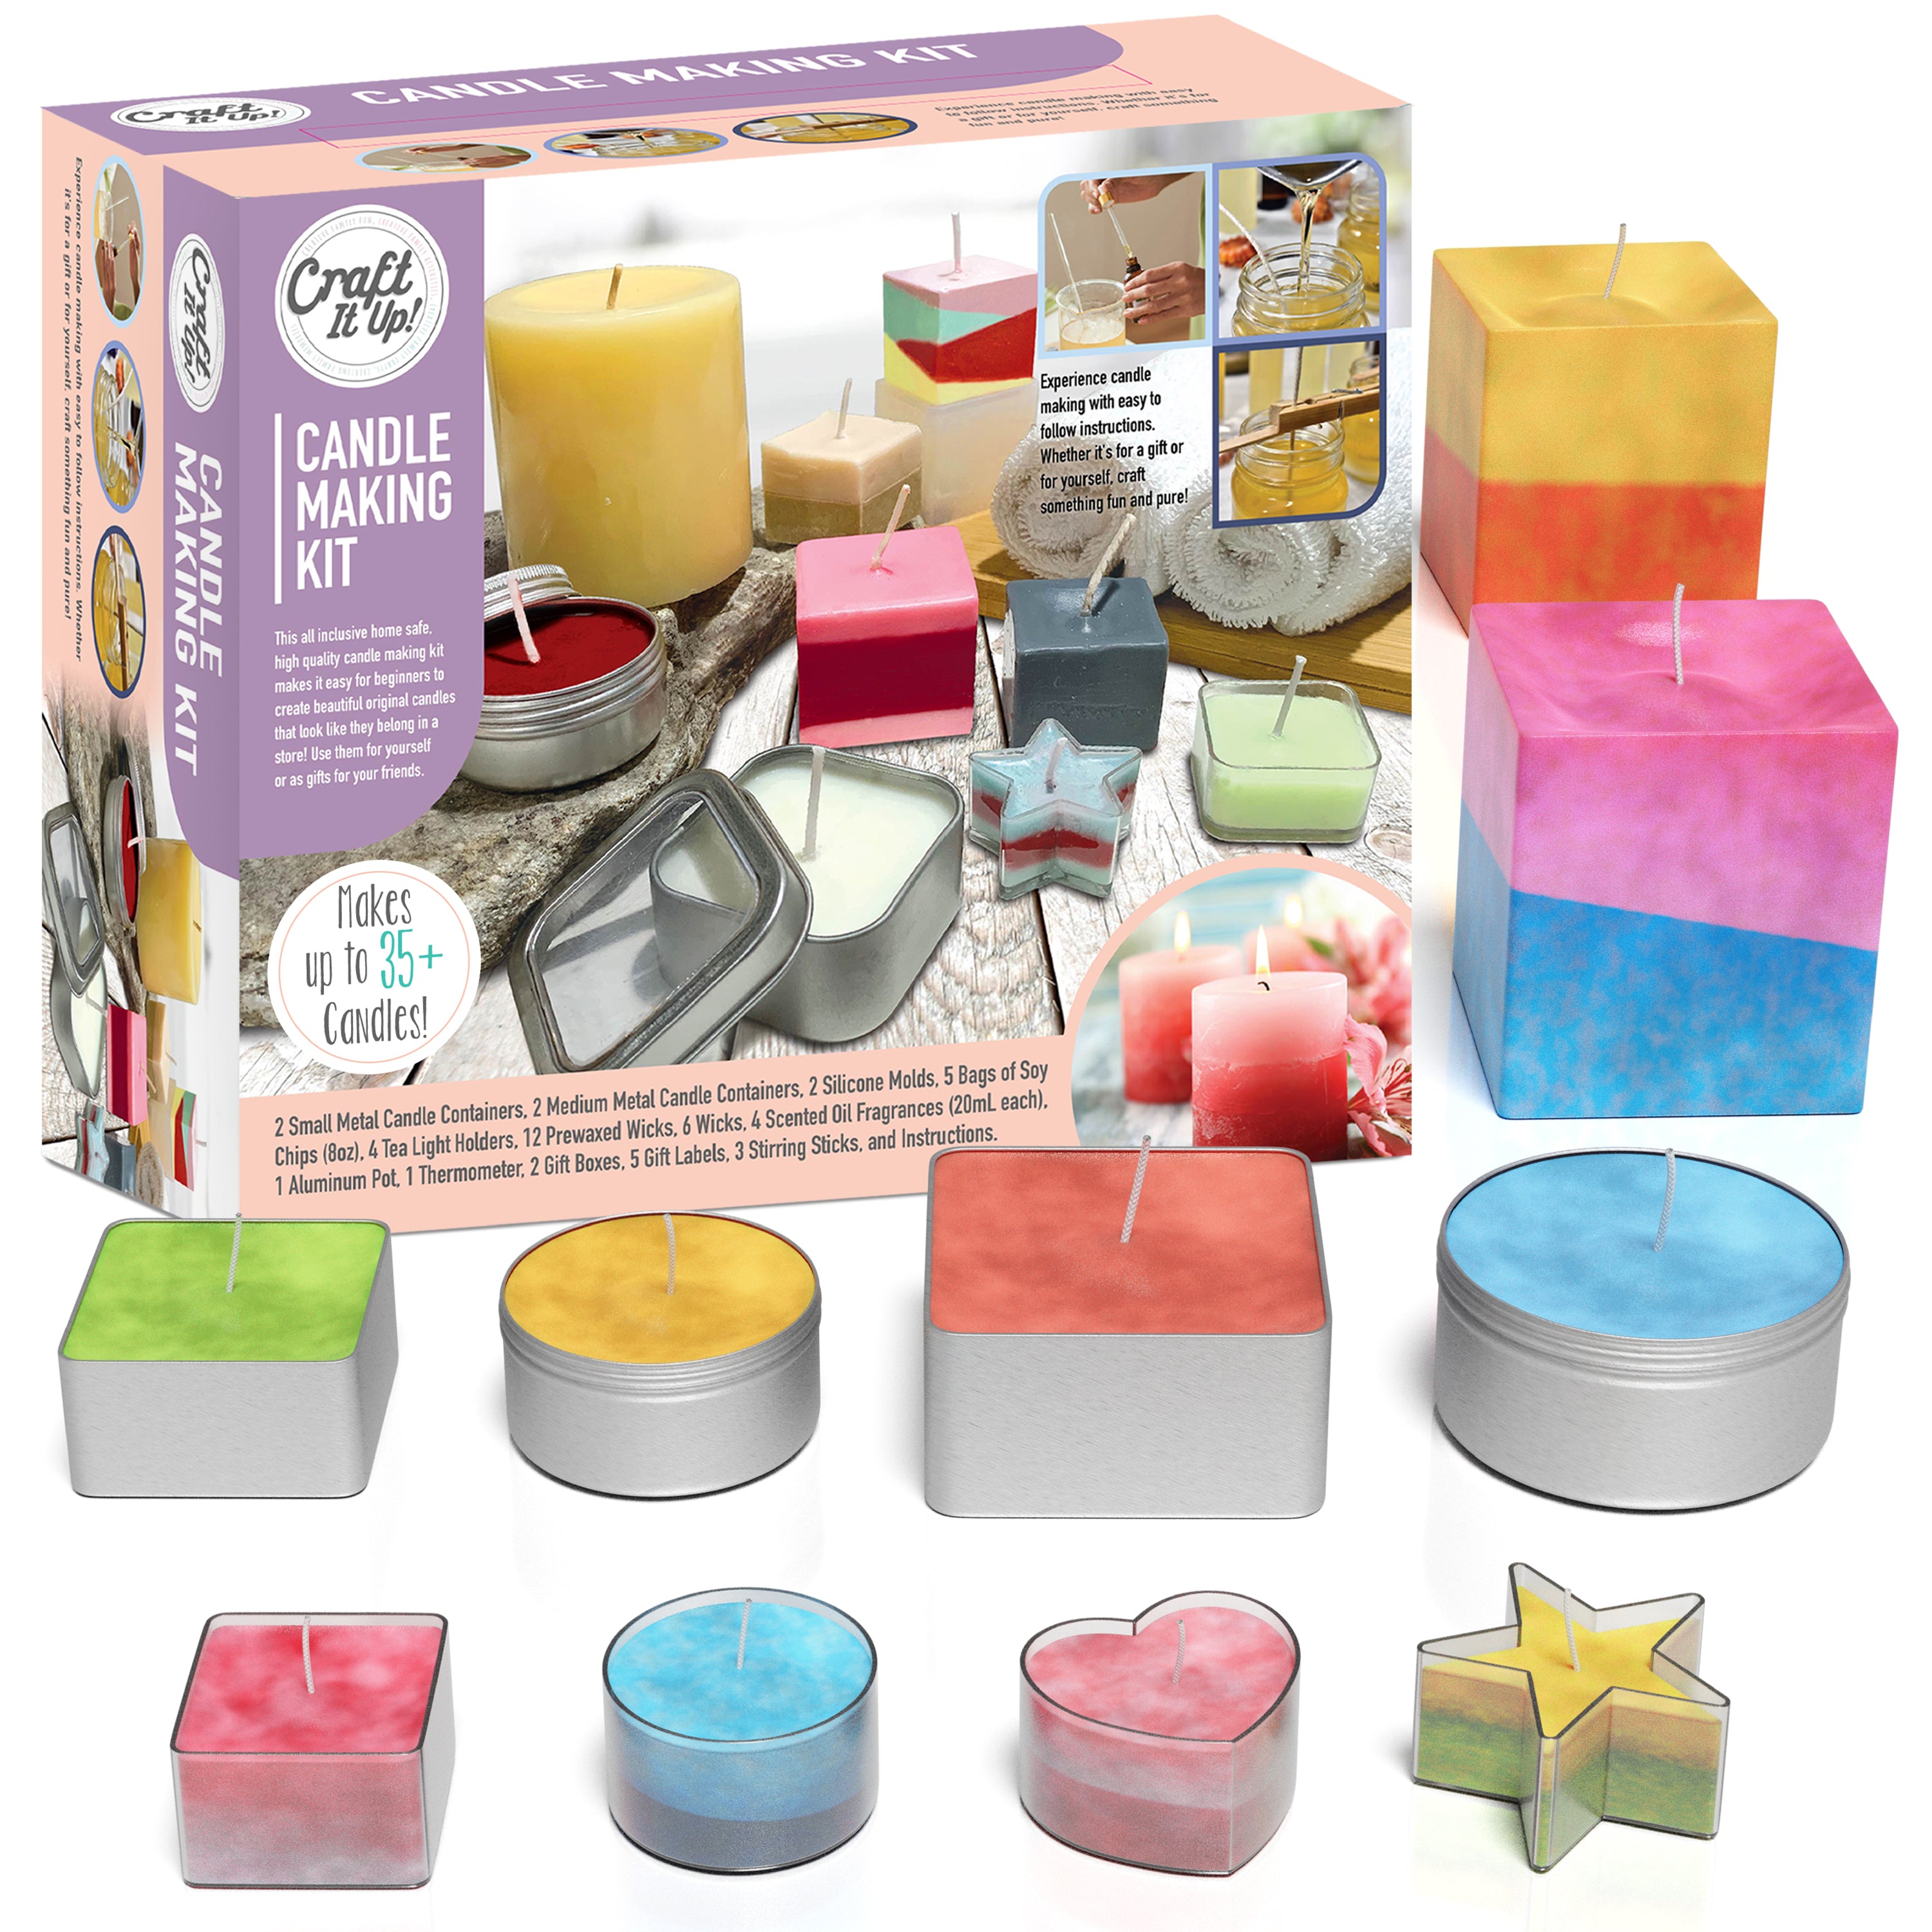 Candle Making Kit with Soy Supplies